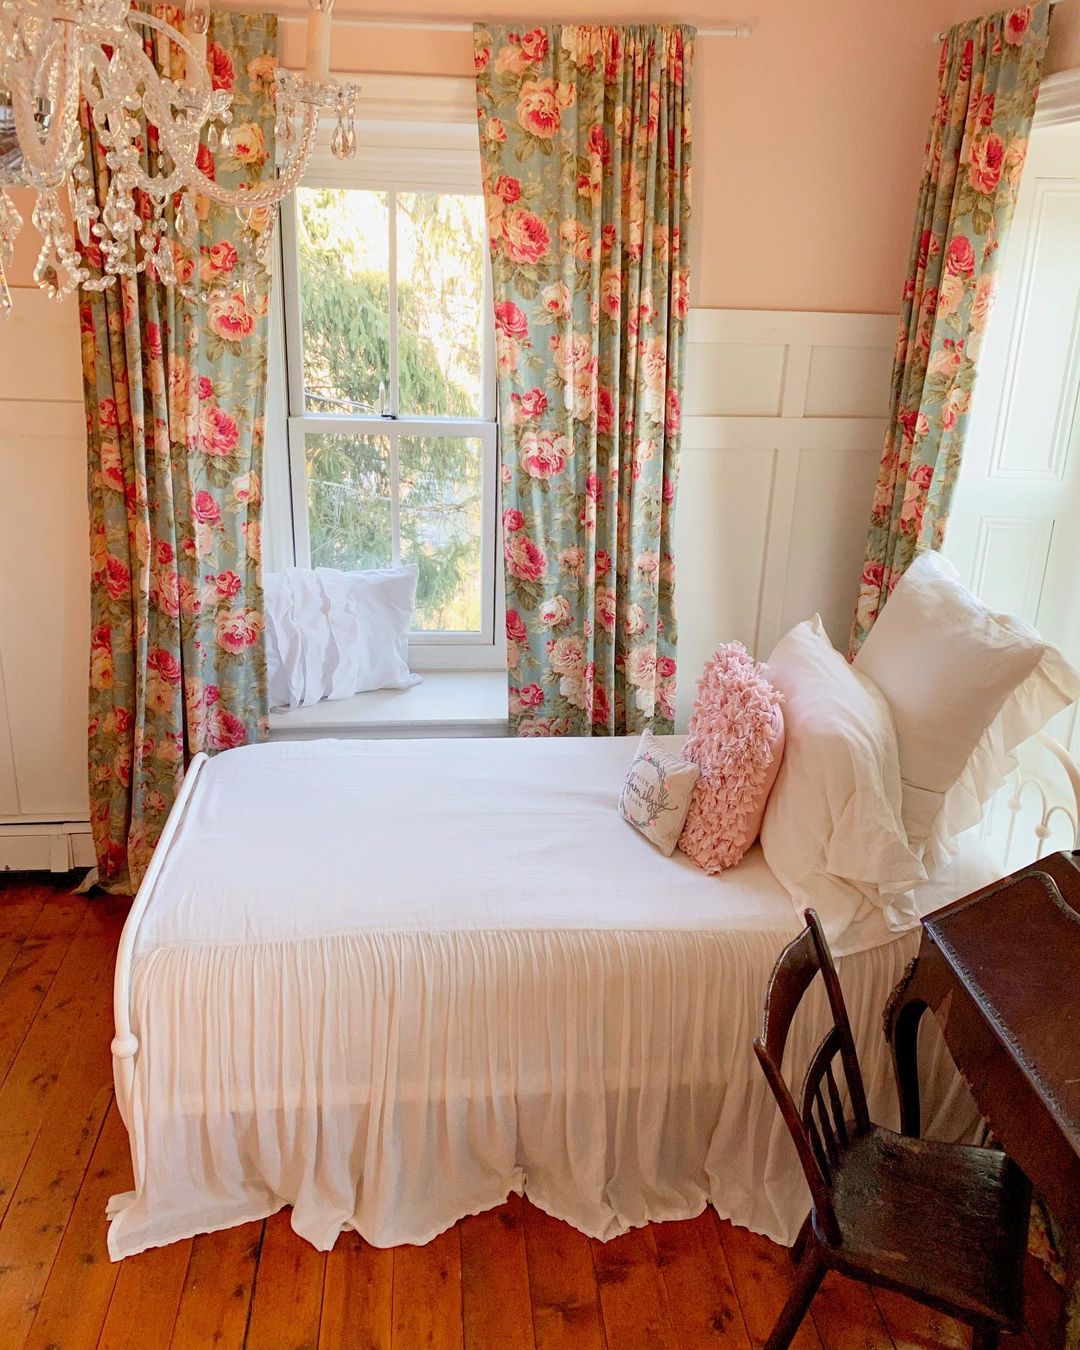 bed on the background of window with floral curtains